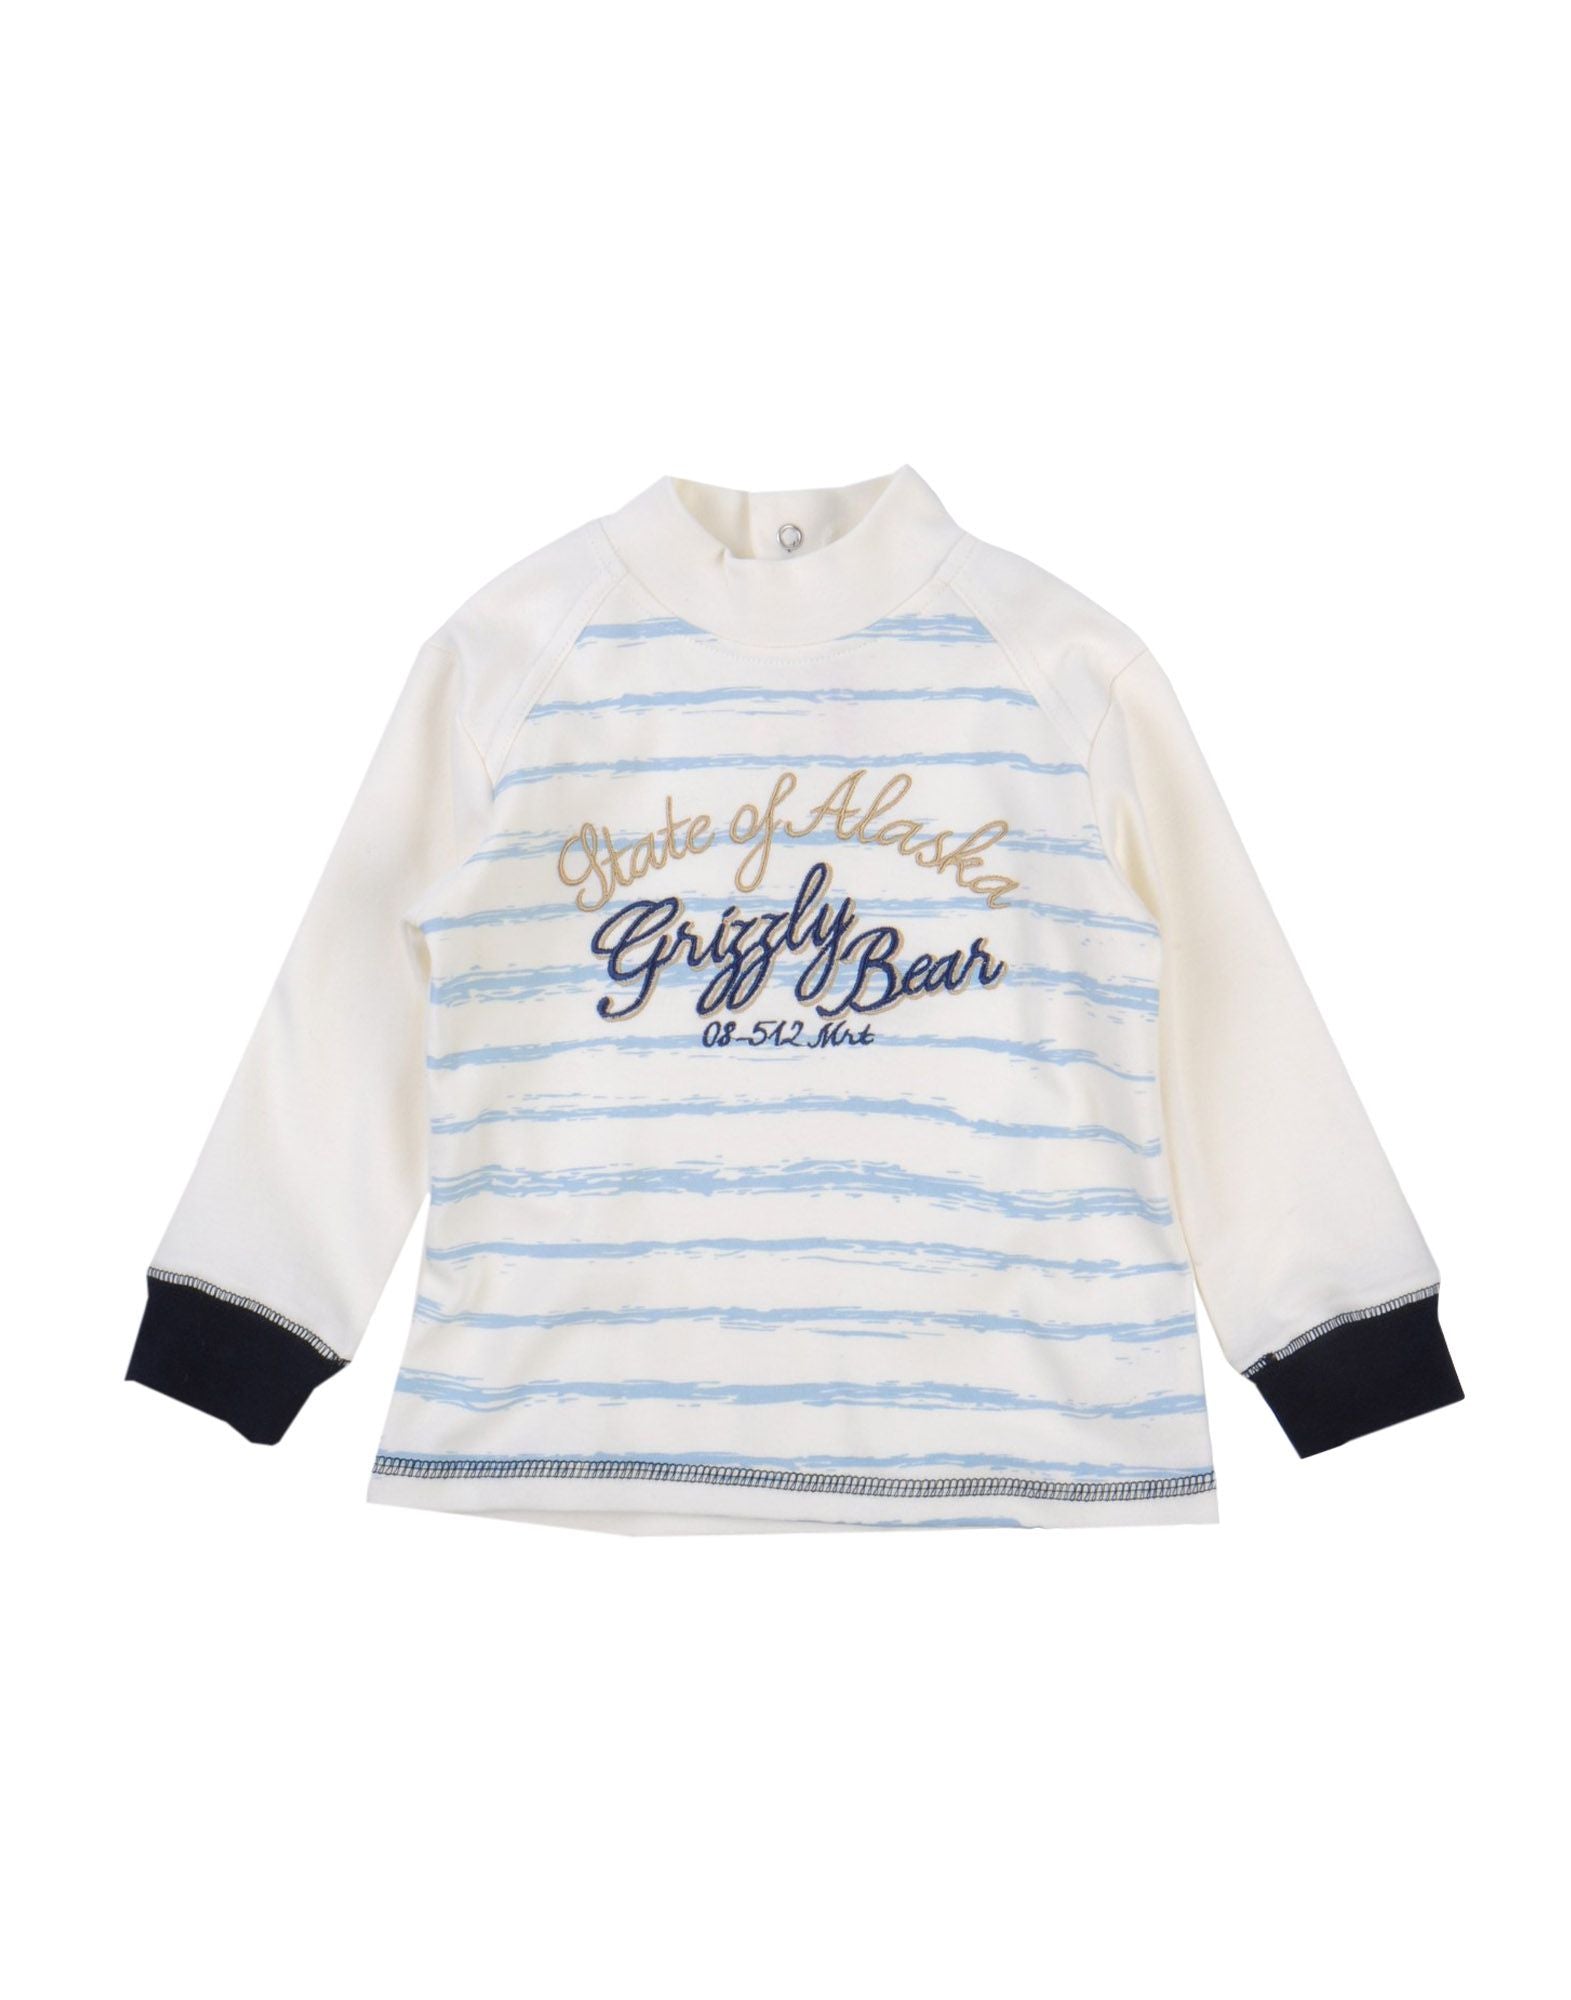 
  Turtleneck from the Mirtillo Childrenswear line, with colored embroidery on the front
  and bu...